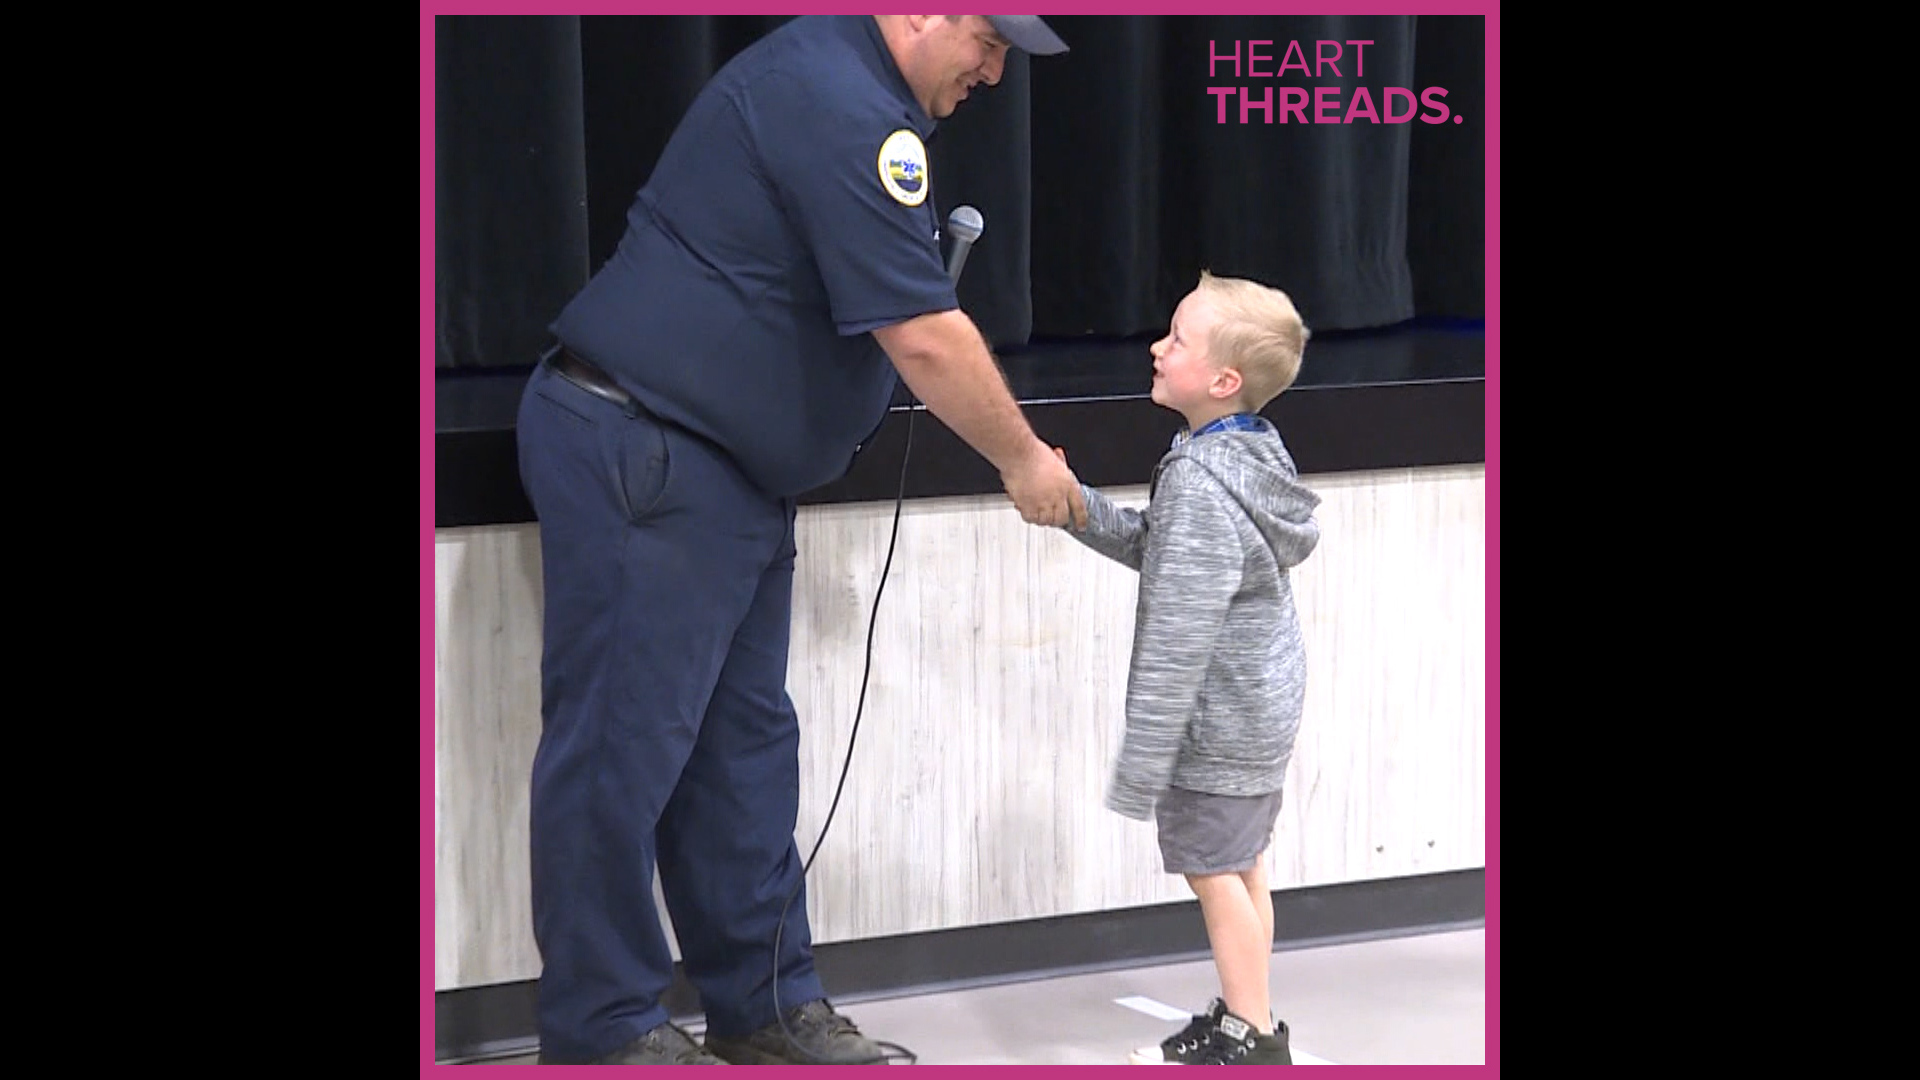 7-year-old Waylon's quick thinking helped to save his neighbor and his local fire department recognized his heroism.